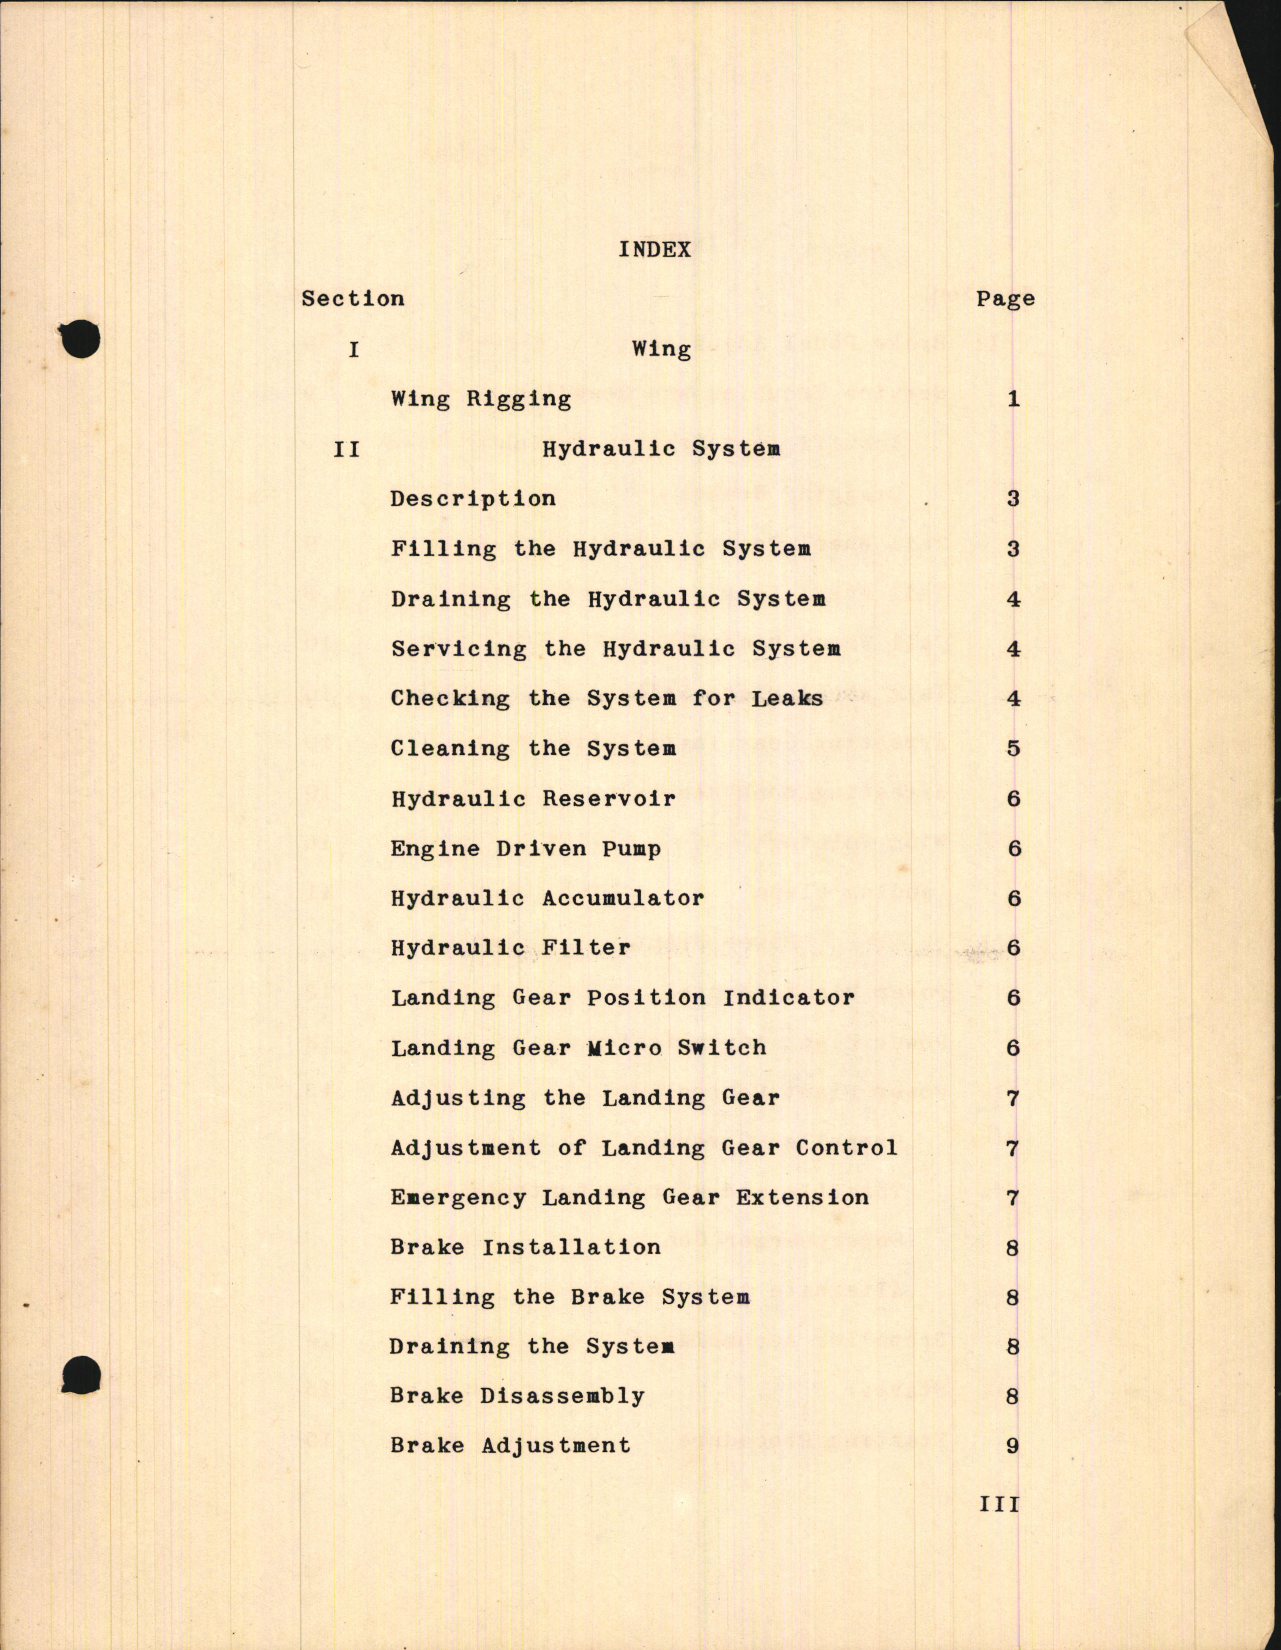 Sample page 5 from AirCorps Library document: Service Notes for Model F4U-1, FG-1, and F3A-1 Airplanes